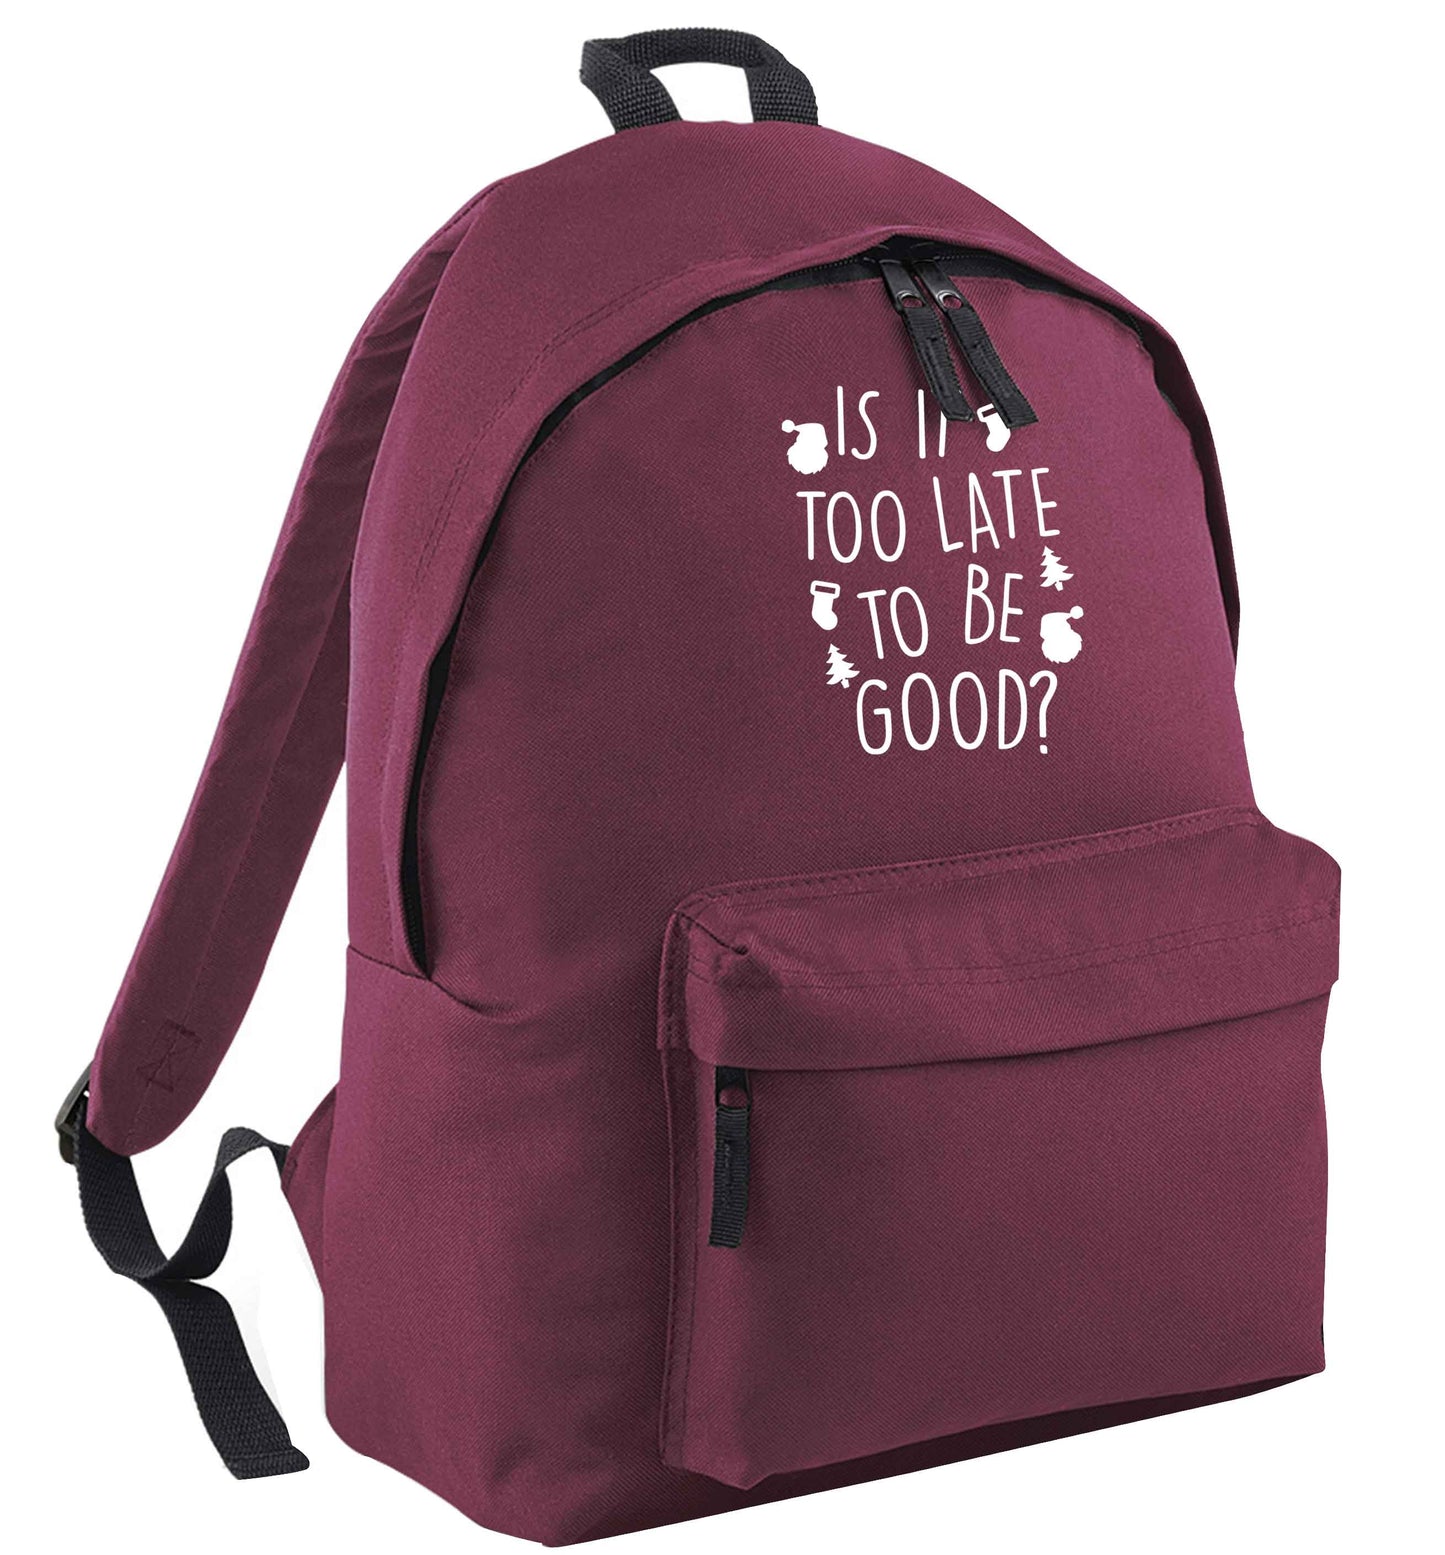 Too Late to be Good maroon adults backpack